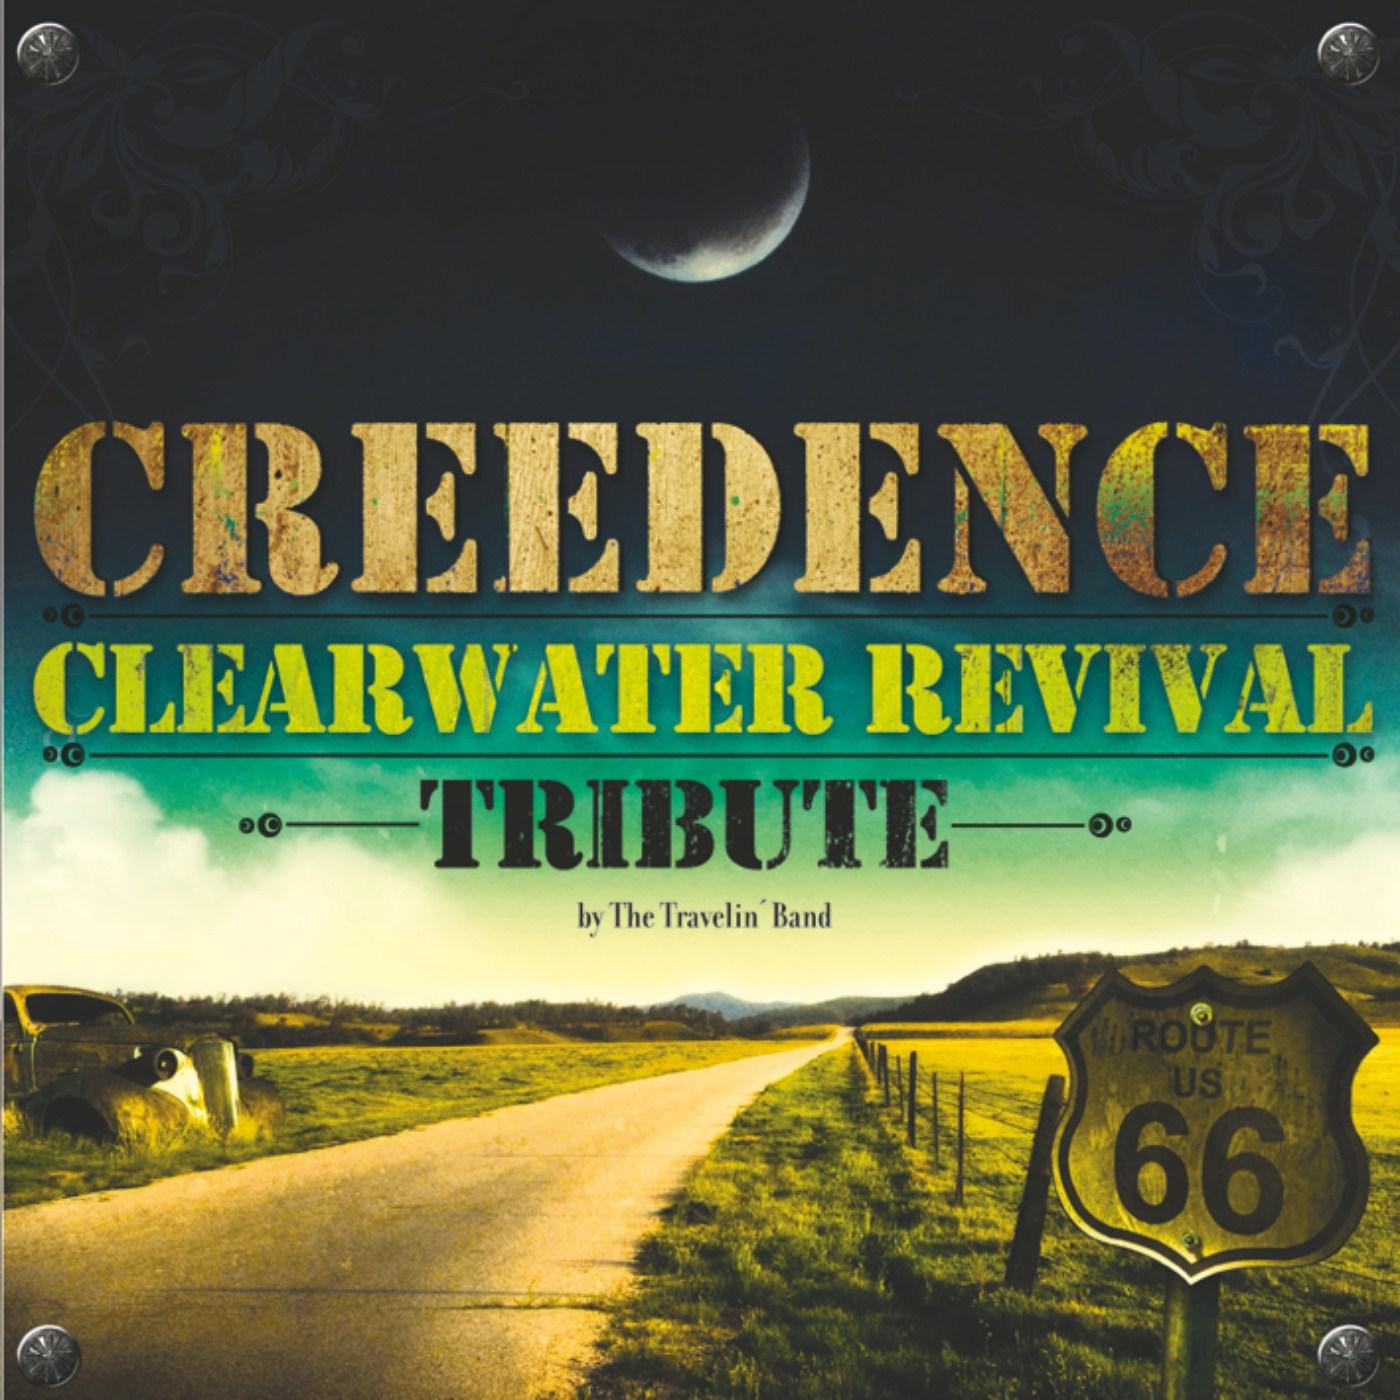 Creedence Clearwater Revival Tribute